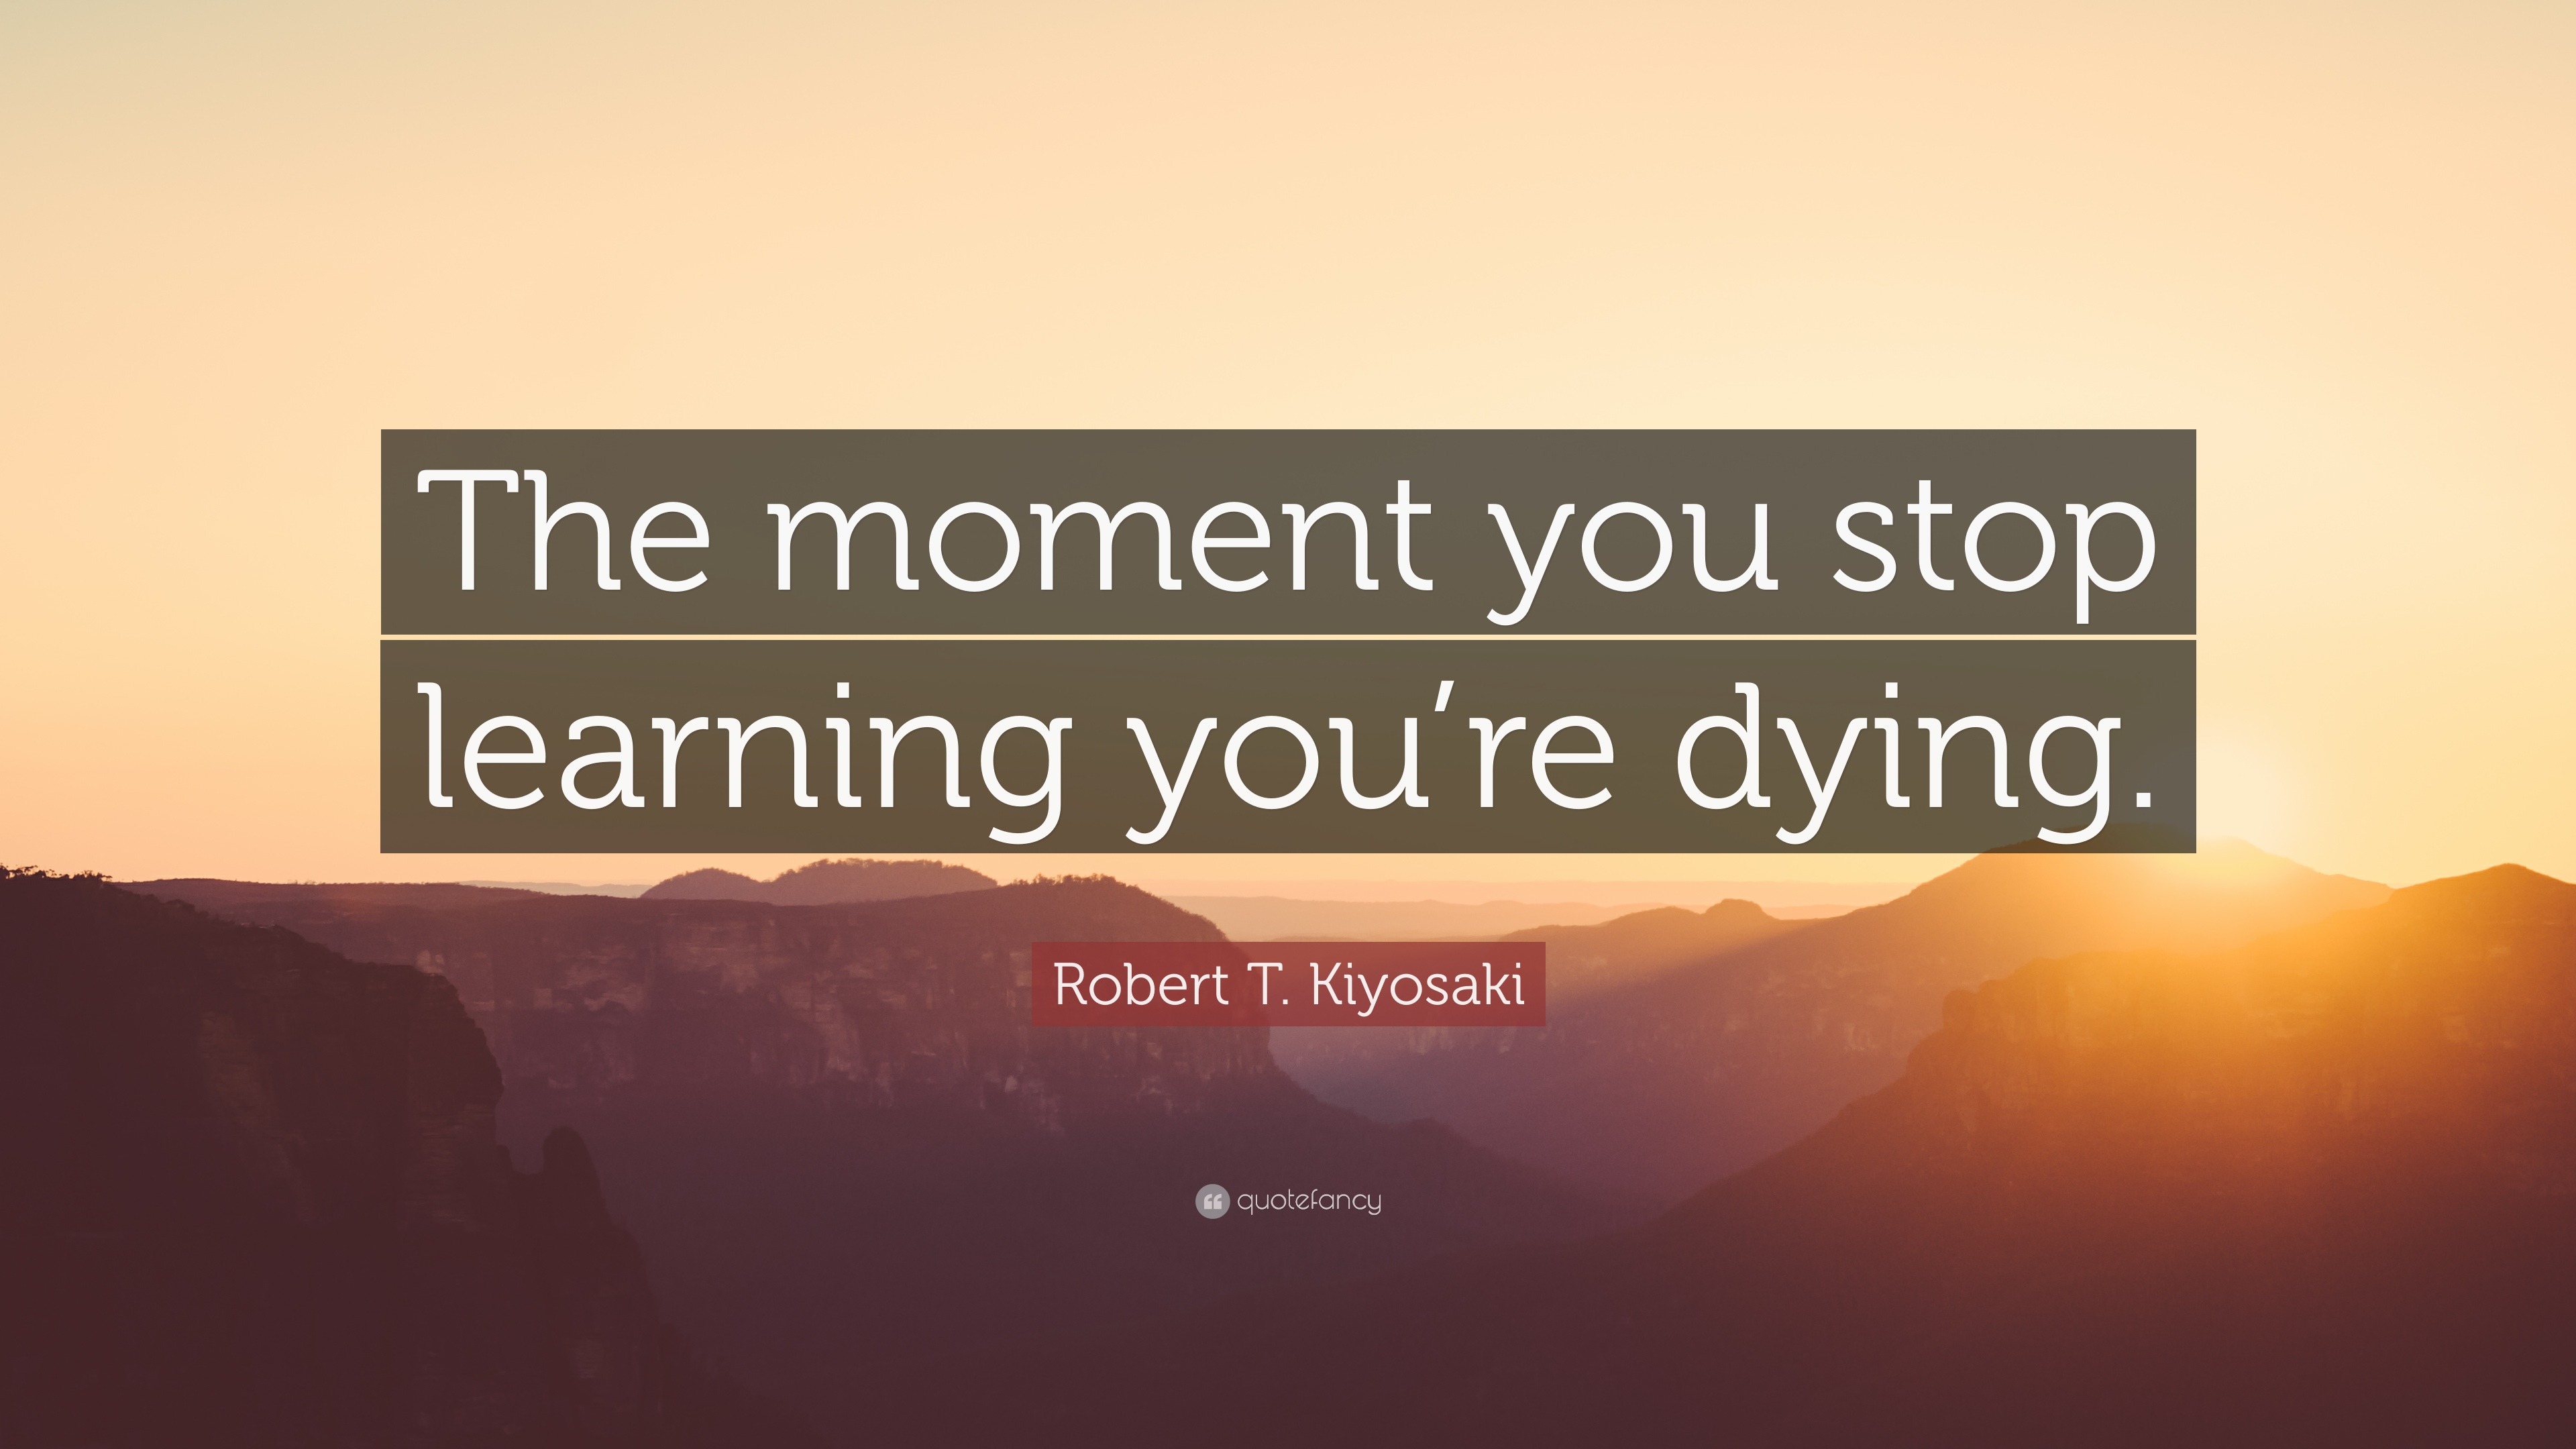 1724292 Robert T Kiyosaki Quote The moment you stop learning you re dying